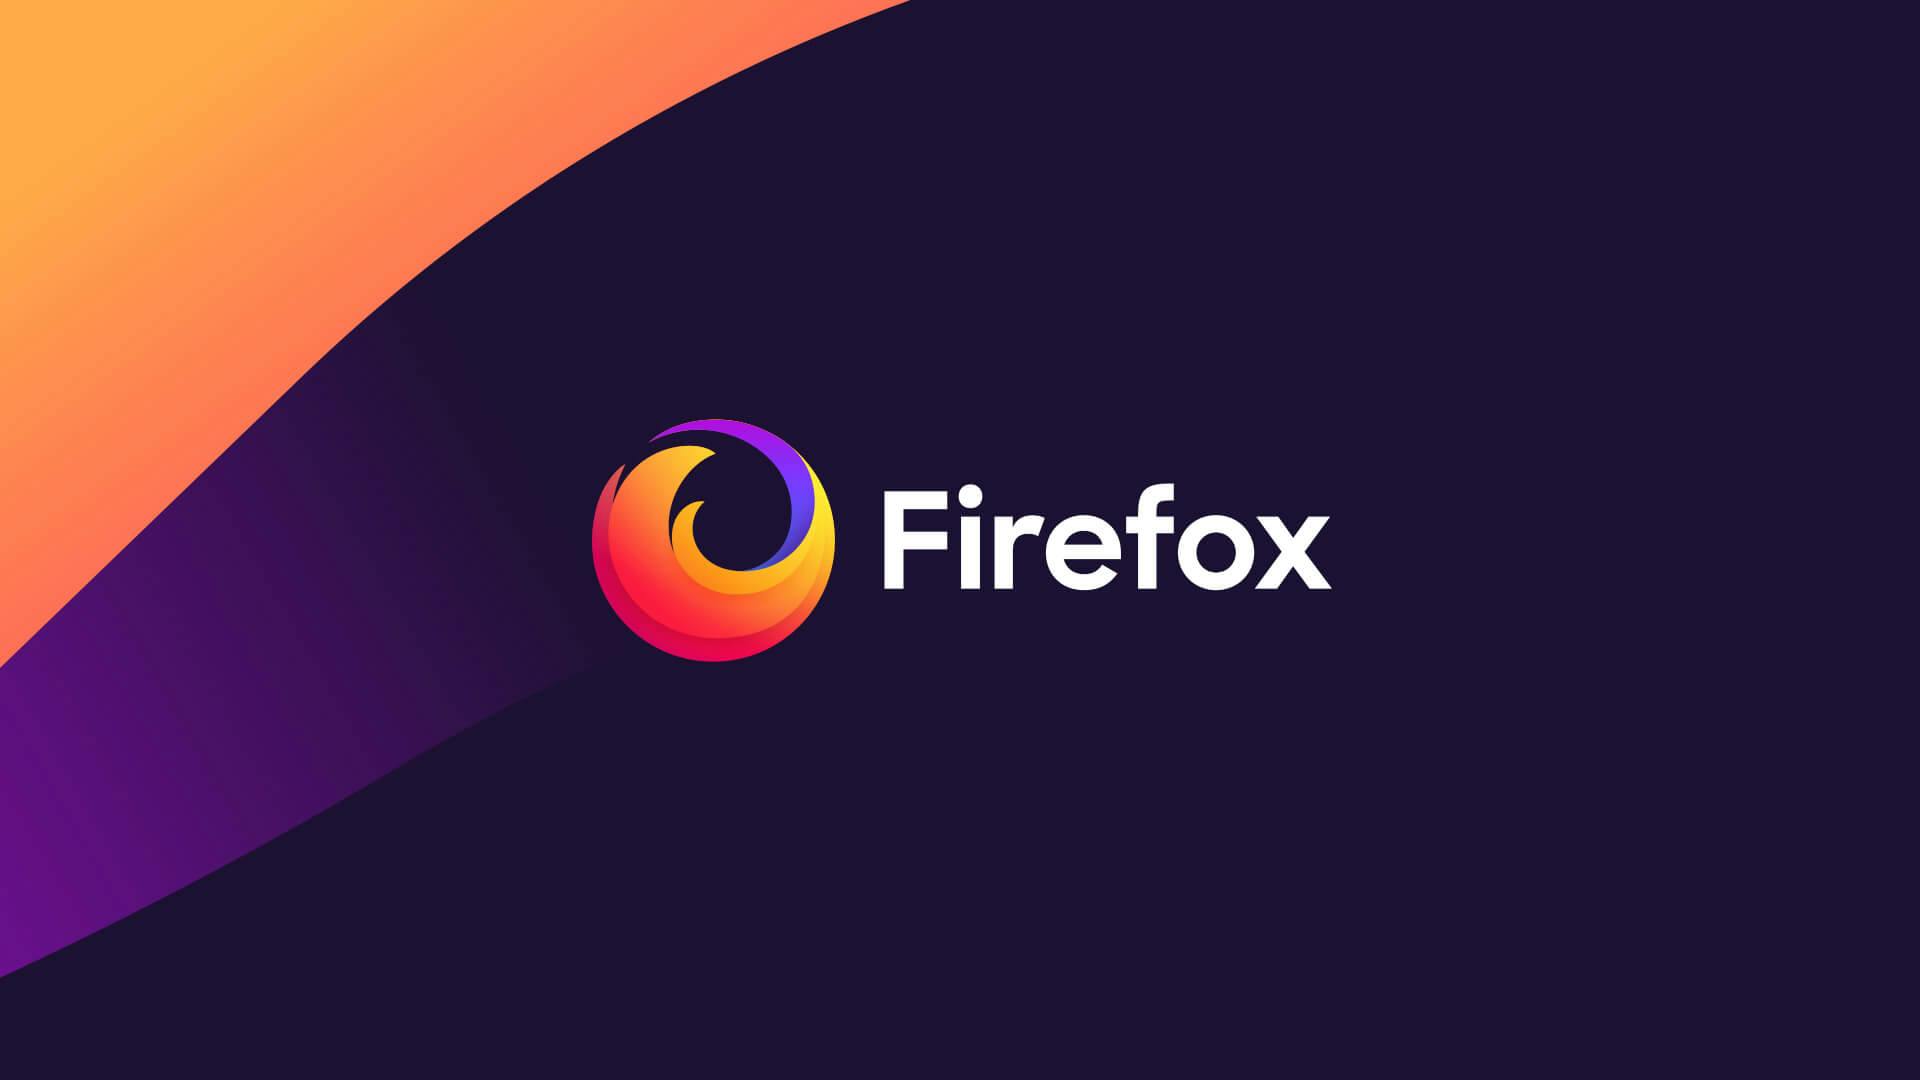 Firefox logo in brand colors